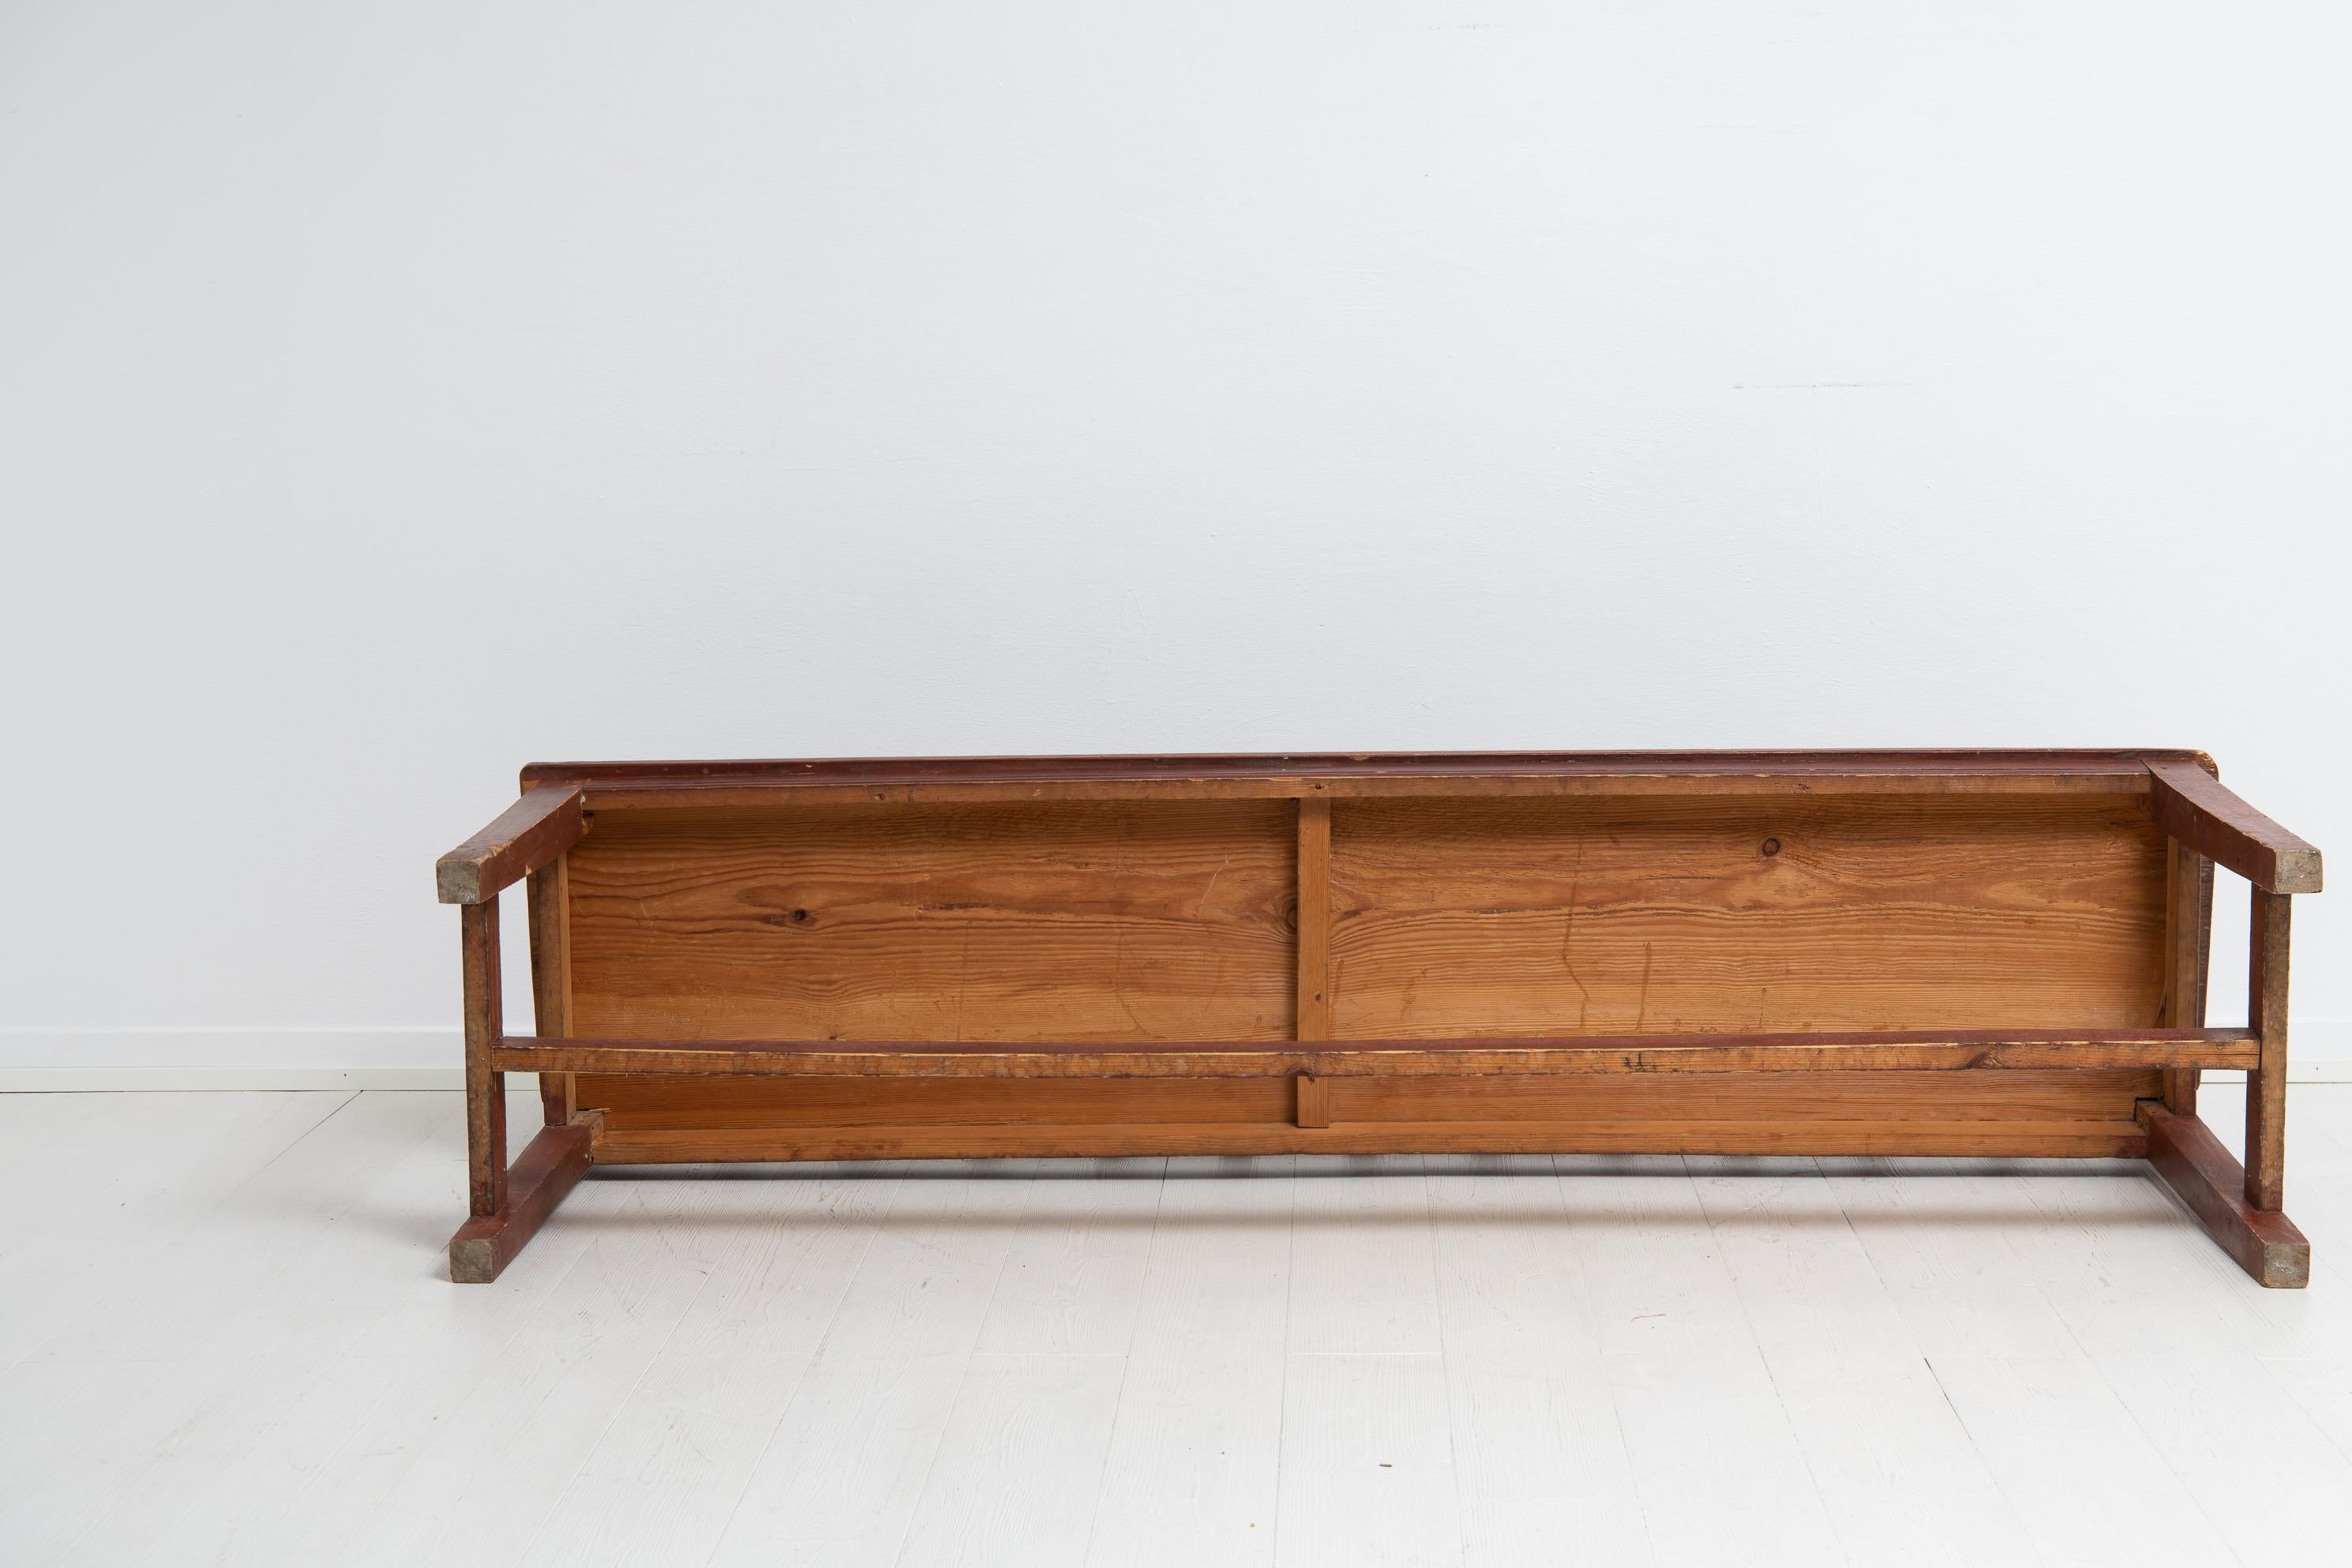 Early 19th Century Swedish Gustavian Folk Art Country Sofa or Bench For Sale 7